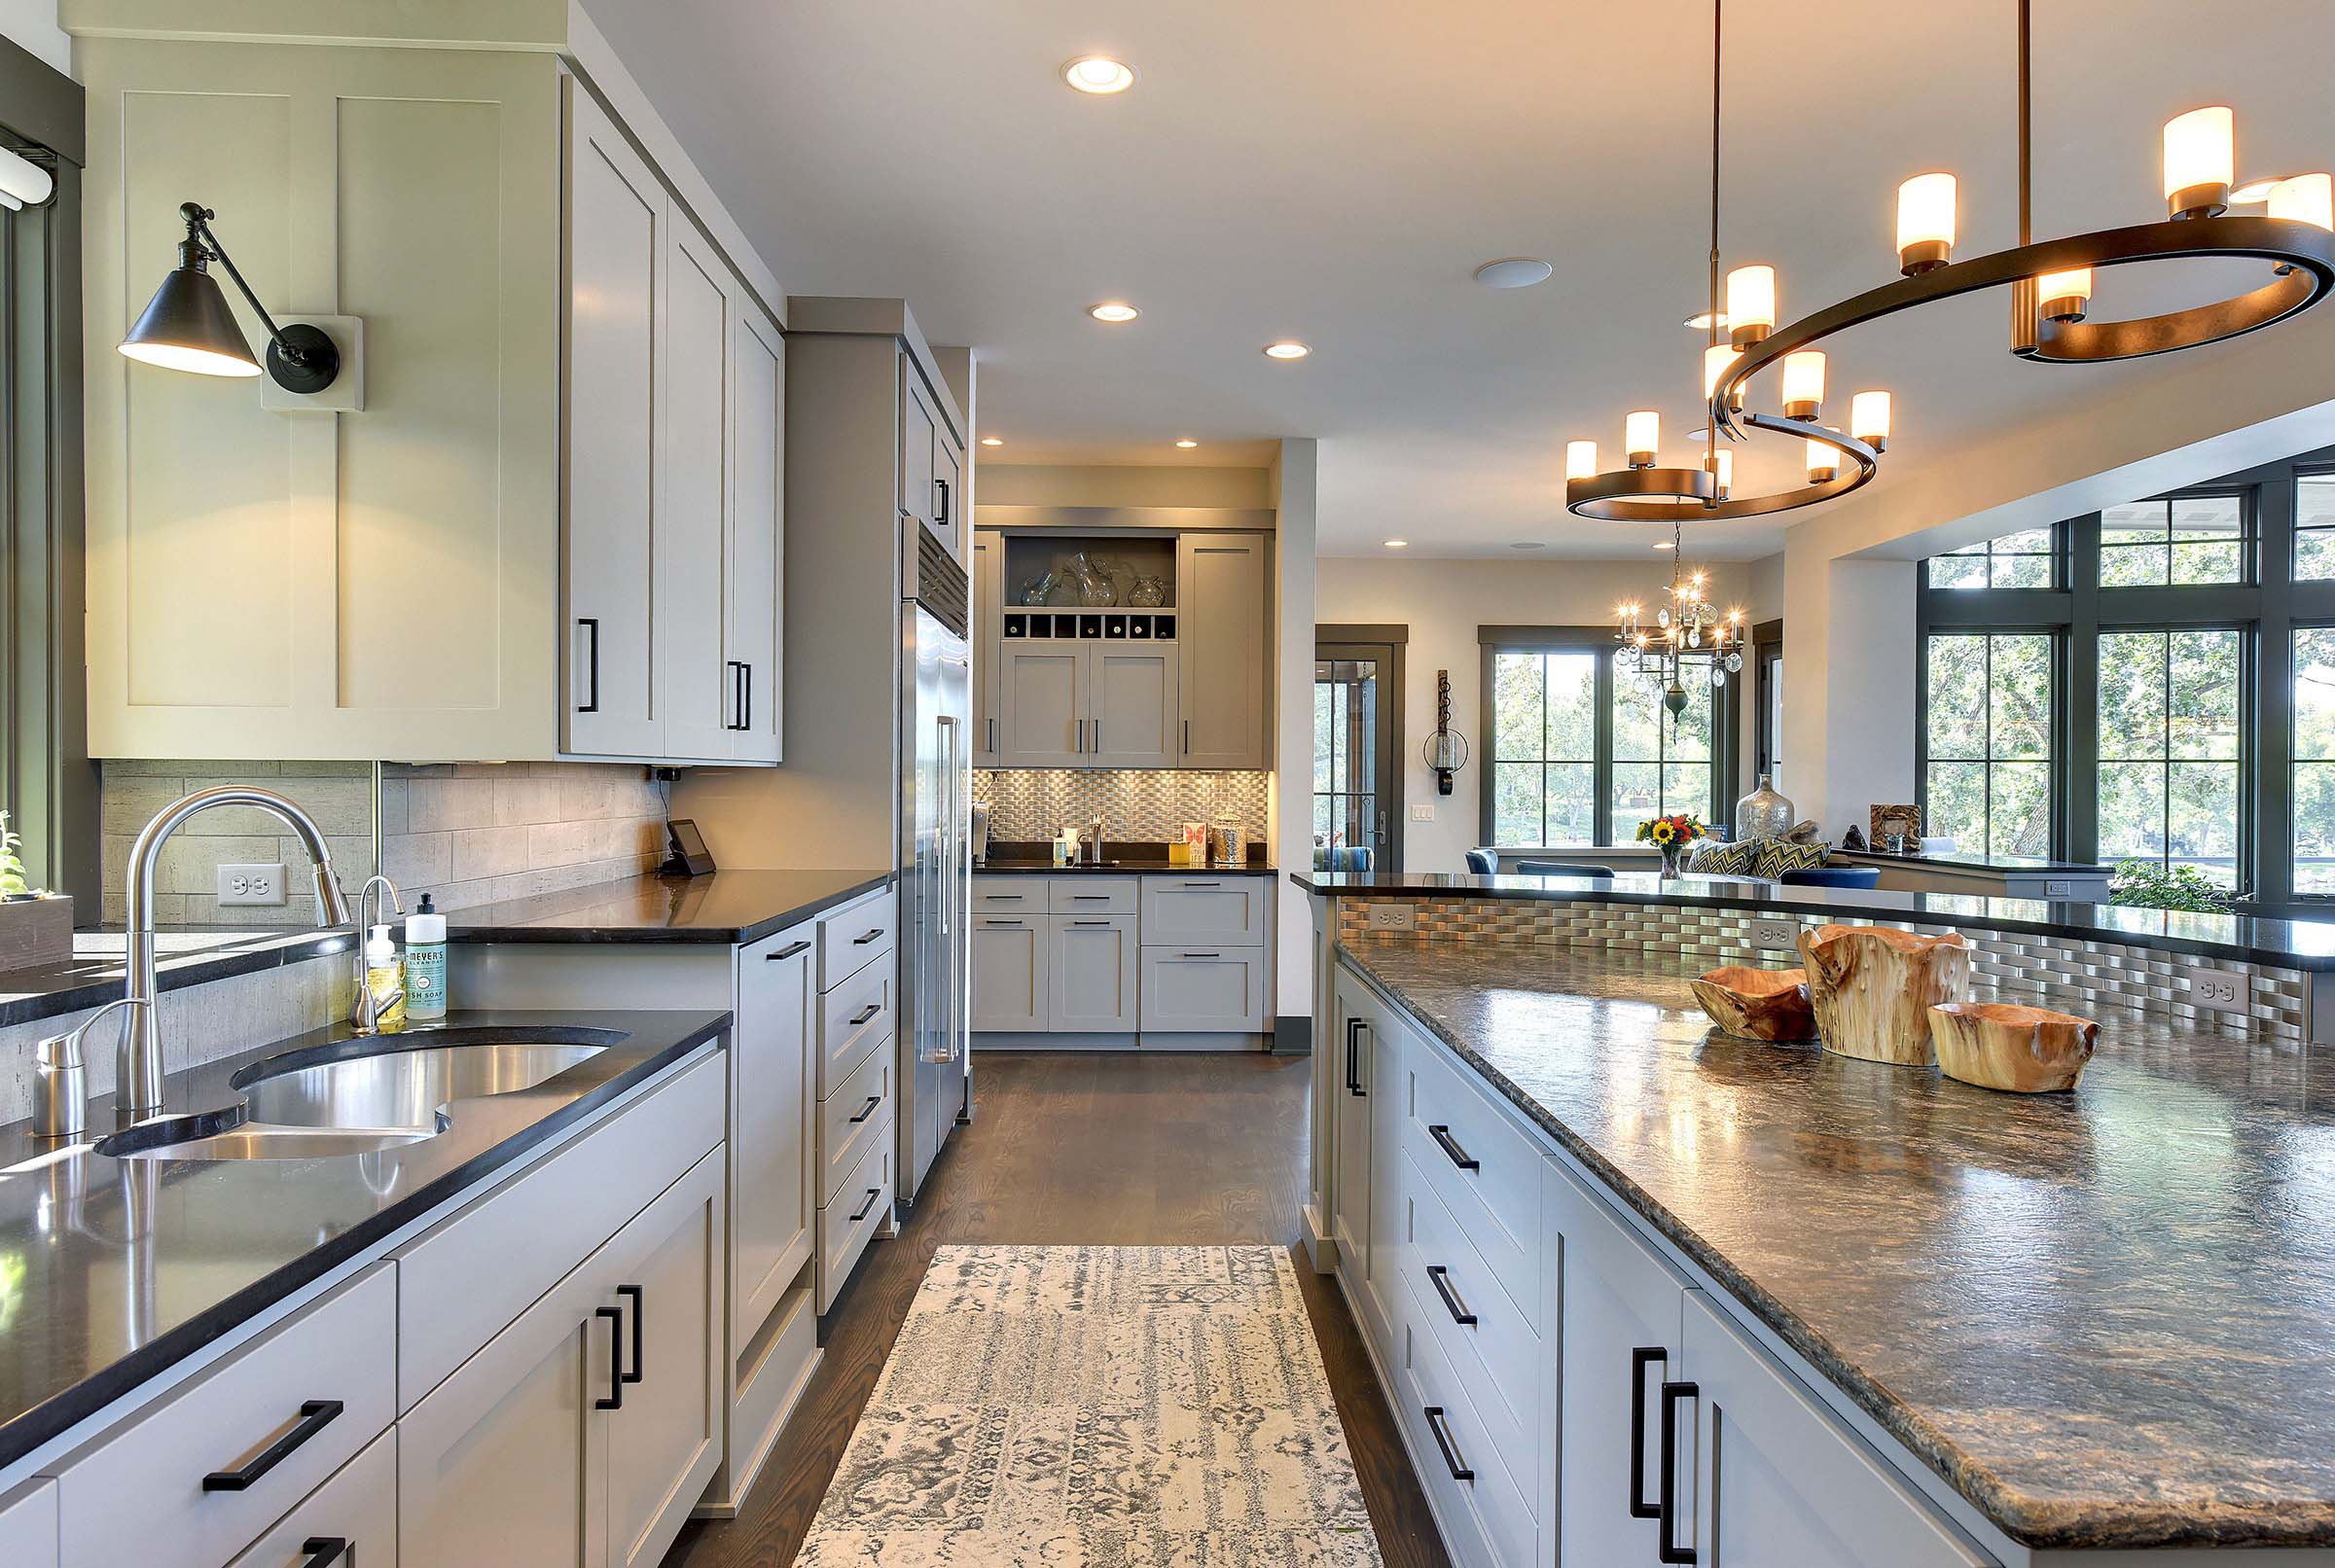 Kitchens in portfolio showcasing granite counter tops and stainless steel appliances.